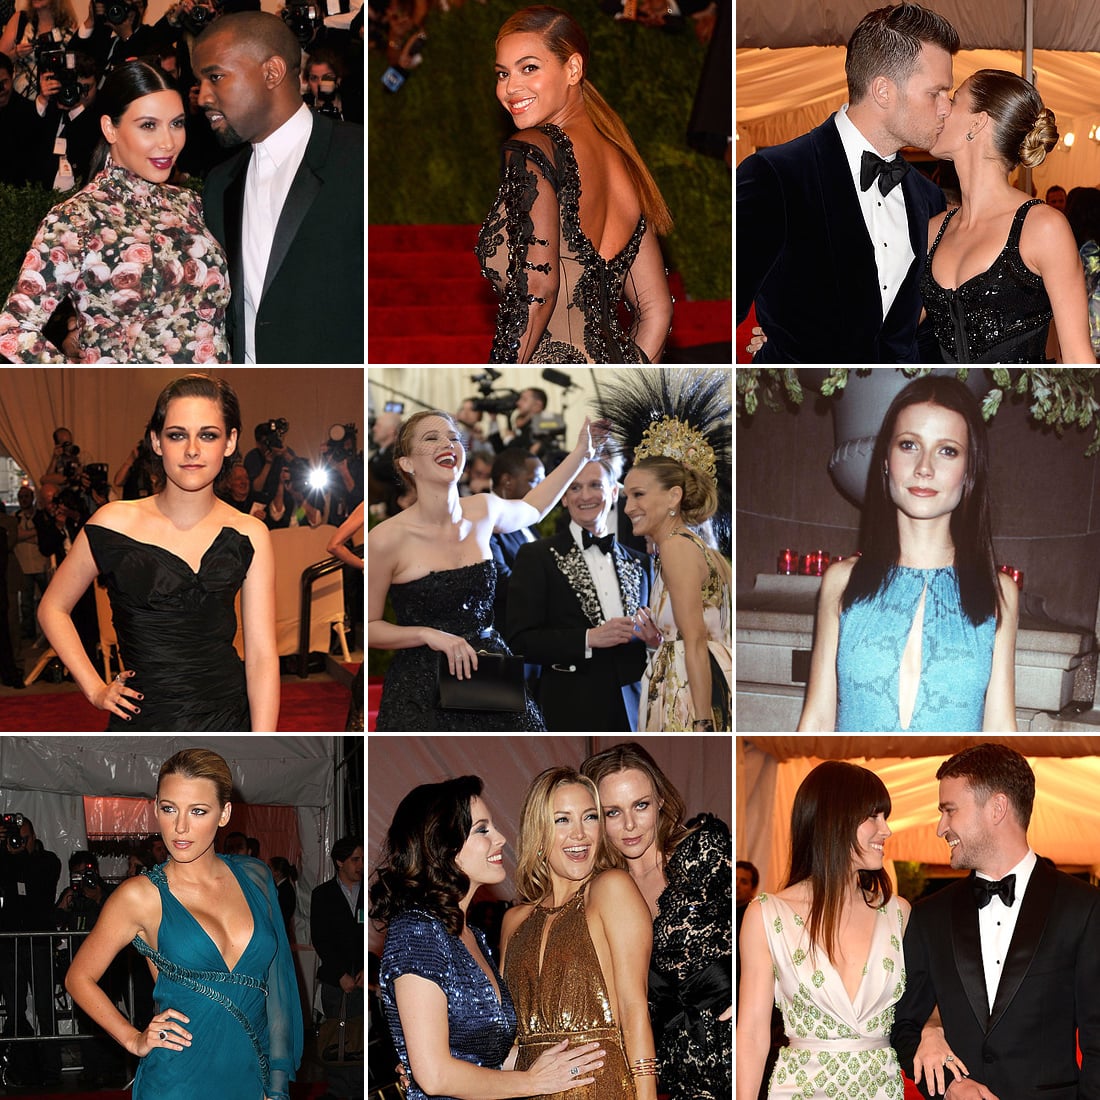 Kim Kardashian To Emma Watson: A Look At The Couples Who Made Their  Relationship Official At MET Gala But Broke Up